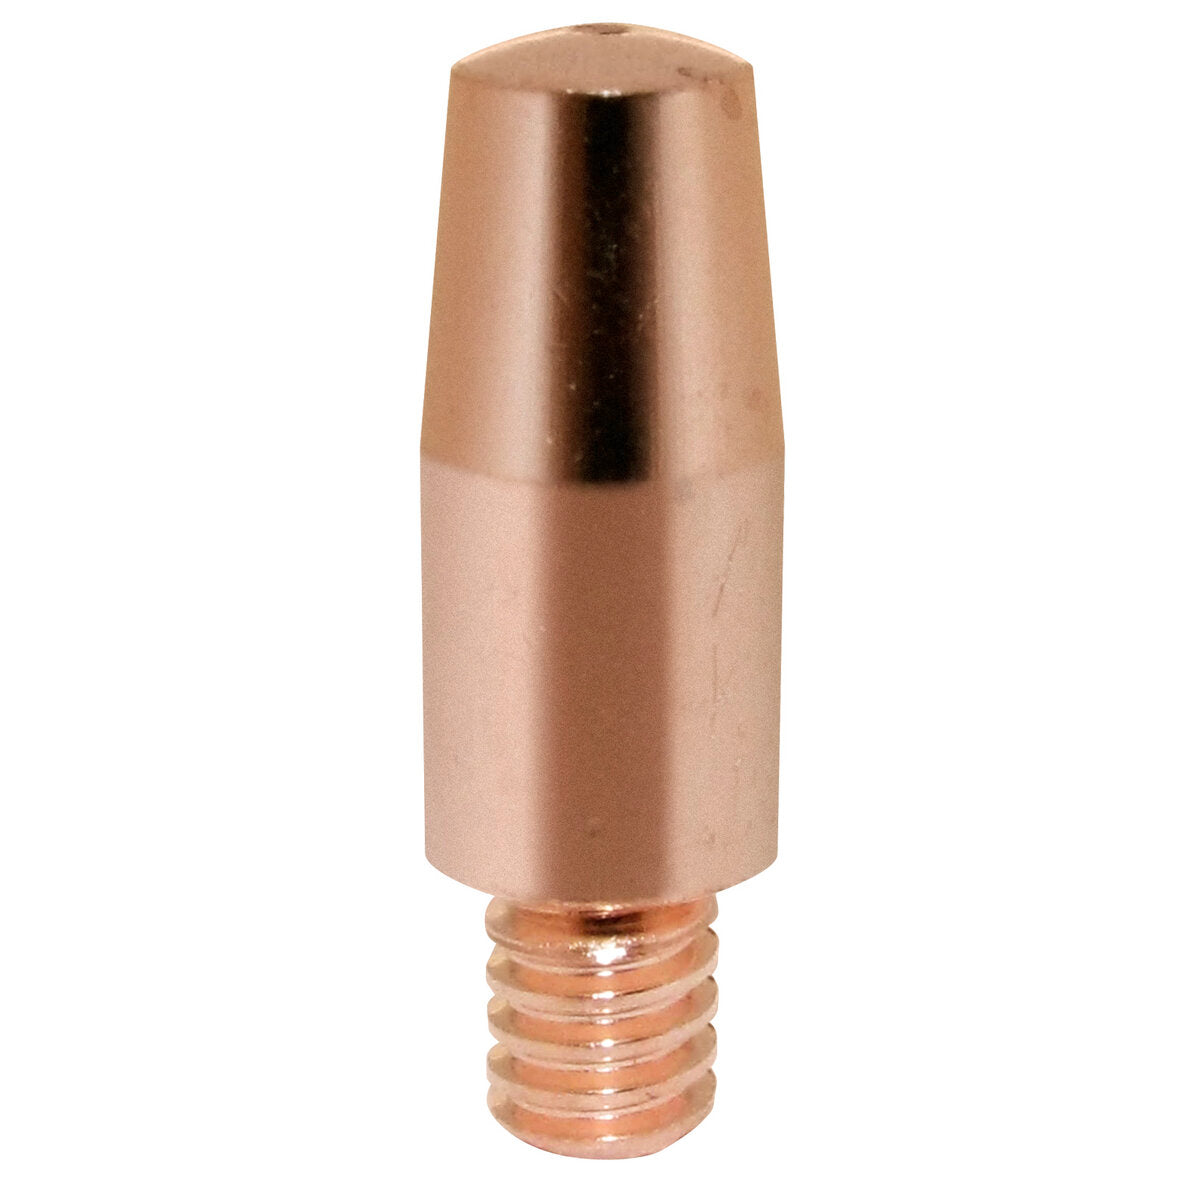 Lincoln Electric - Copper Plus® Contact Tip - 350A, Standard, 0.045 in (10/pack) - KP2744-045